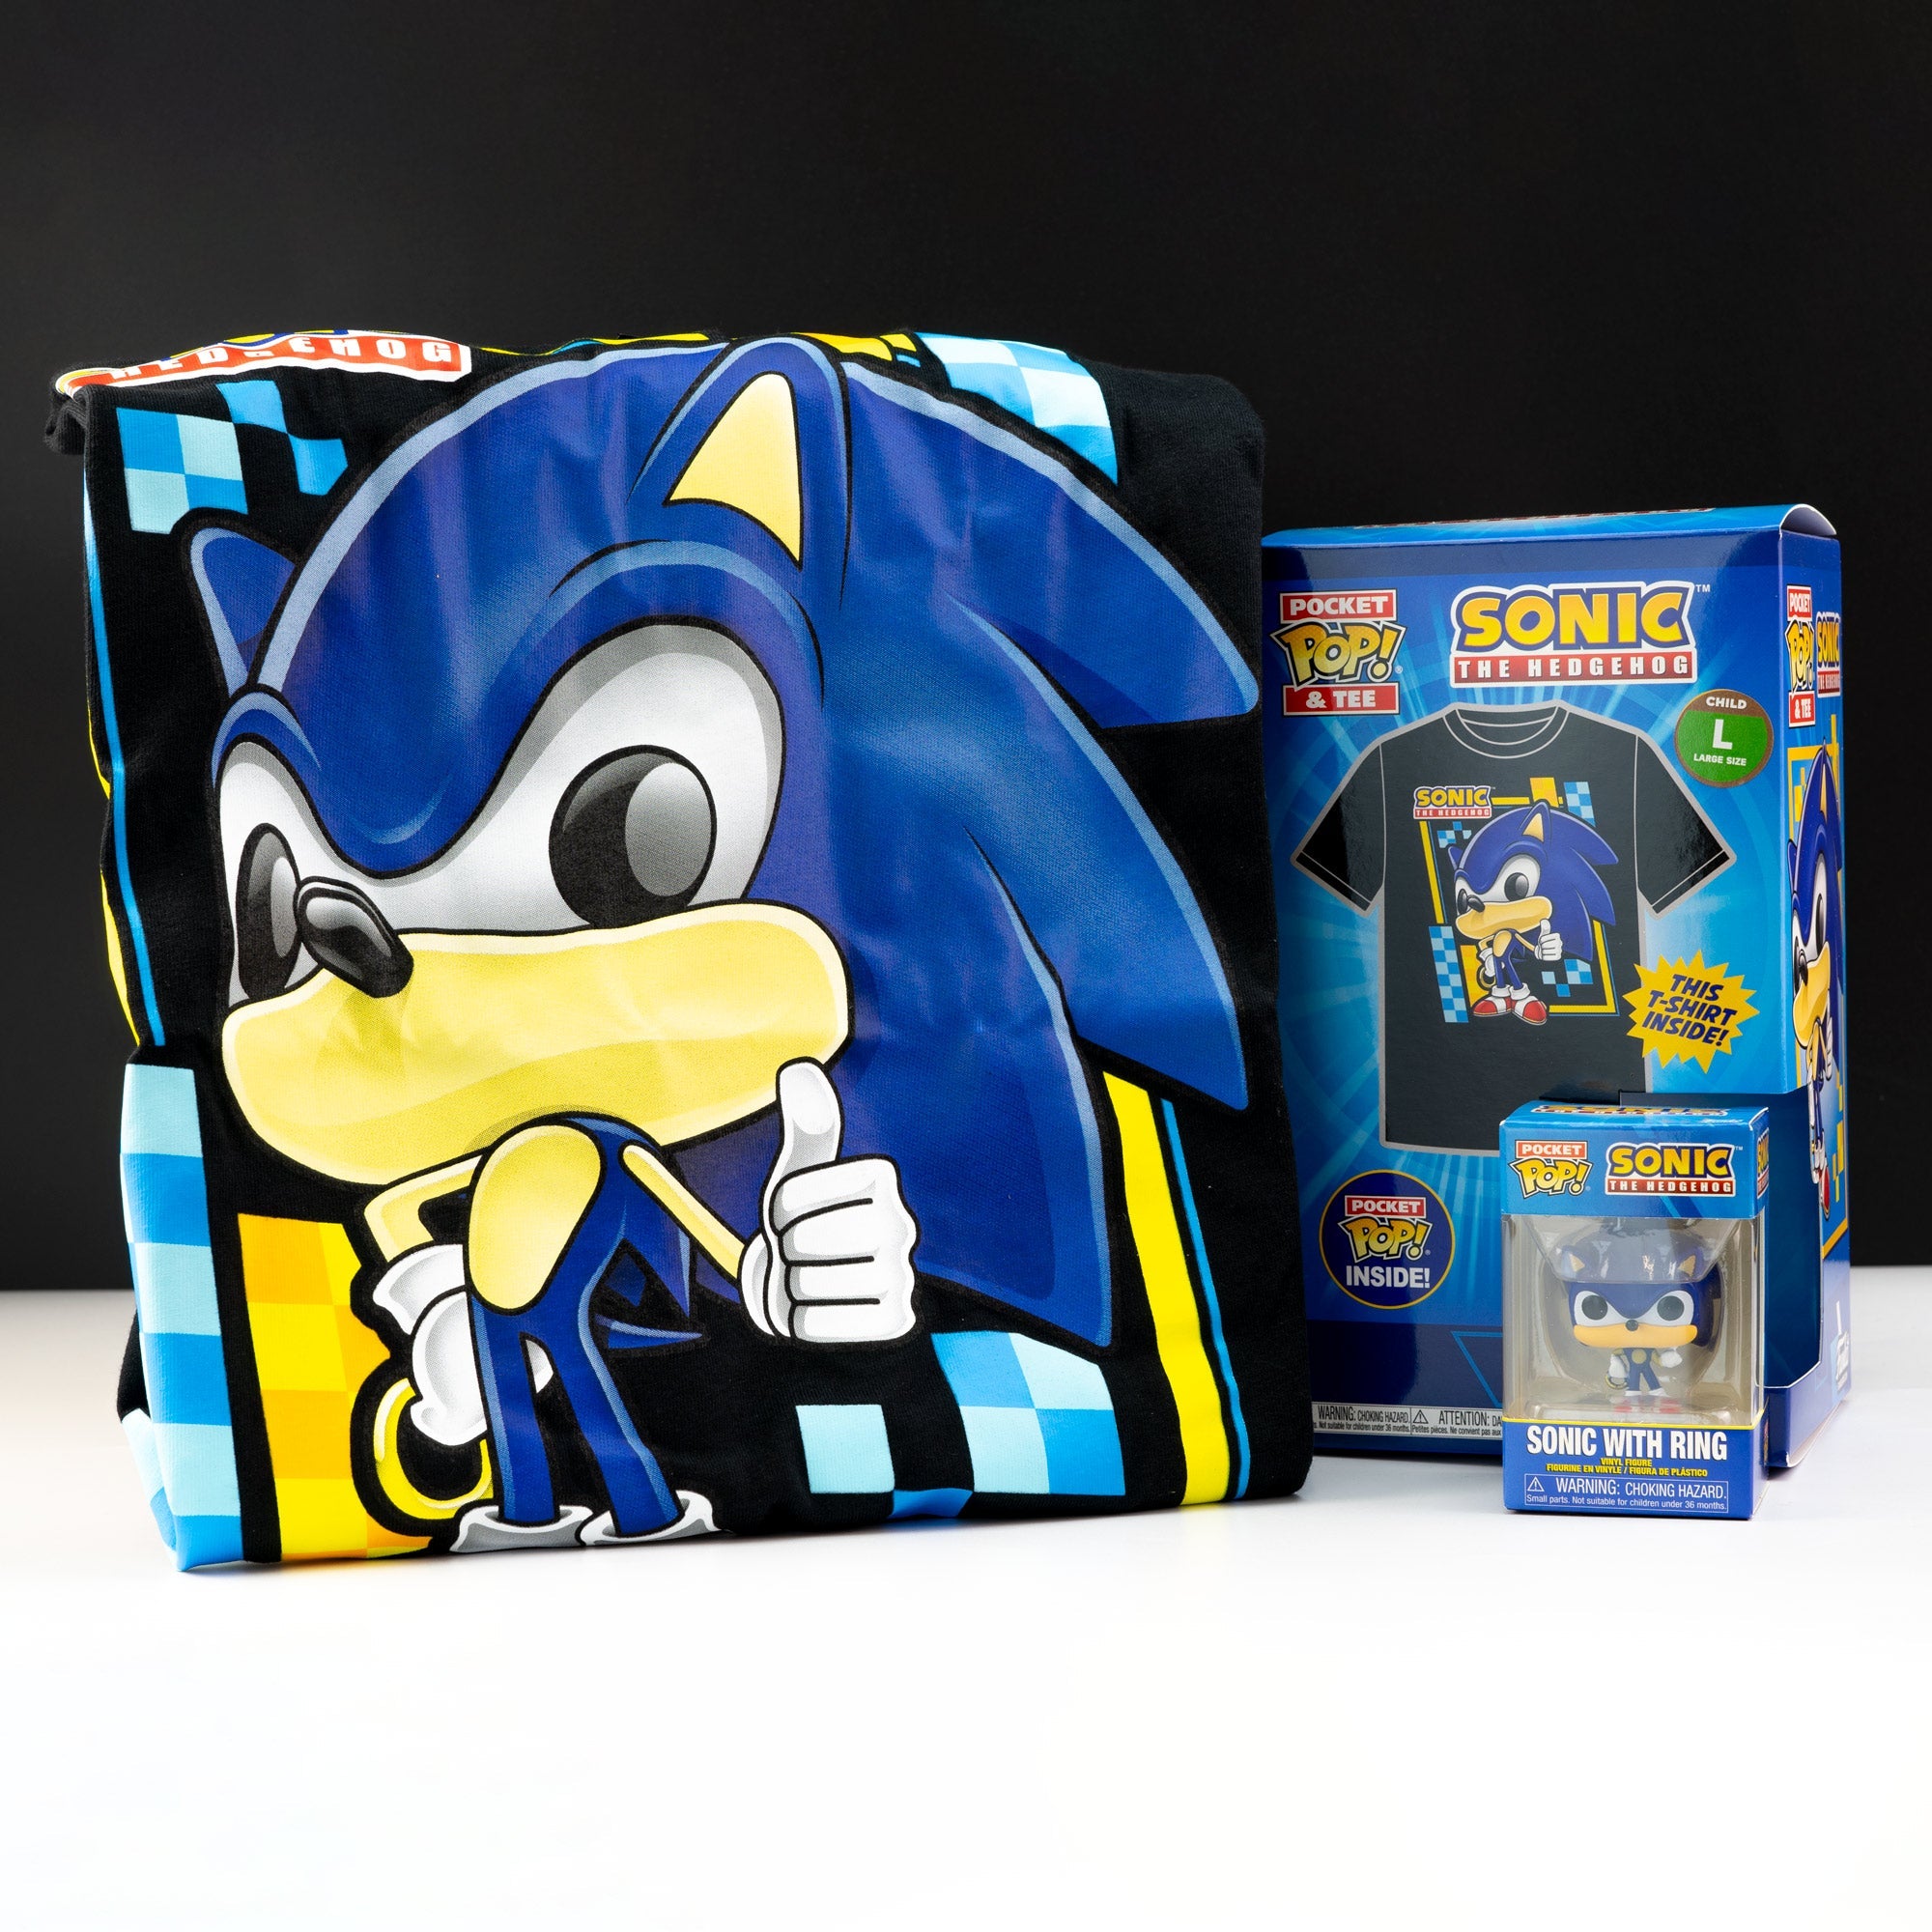 Sega Sonic the Hedgehog with Ring Pocket Pop! Vinyl and Tee Set for Kids - GeekCore